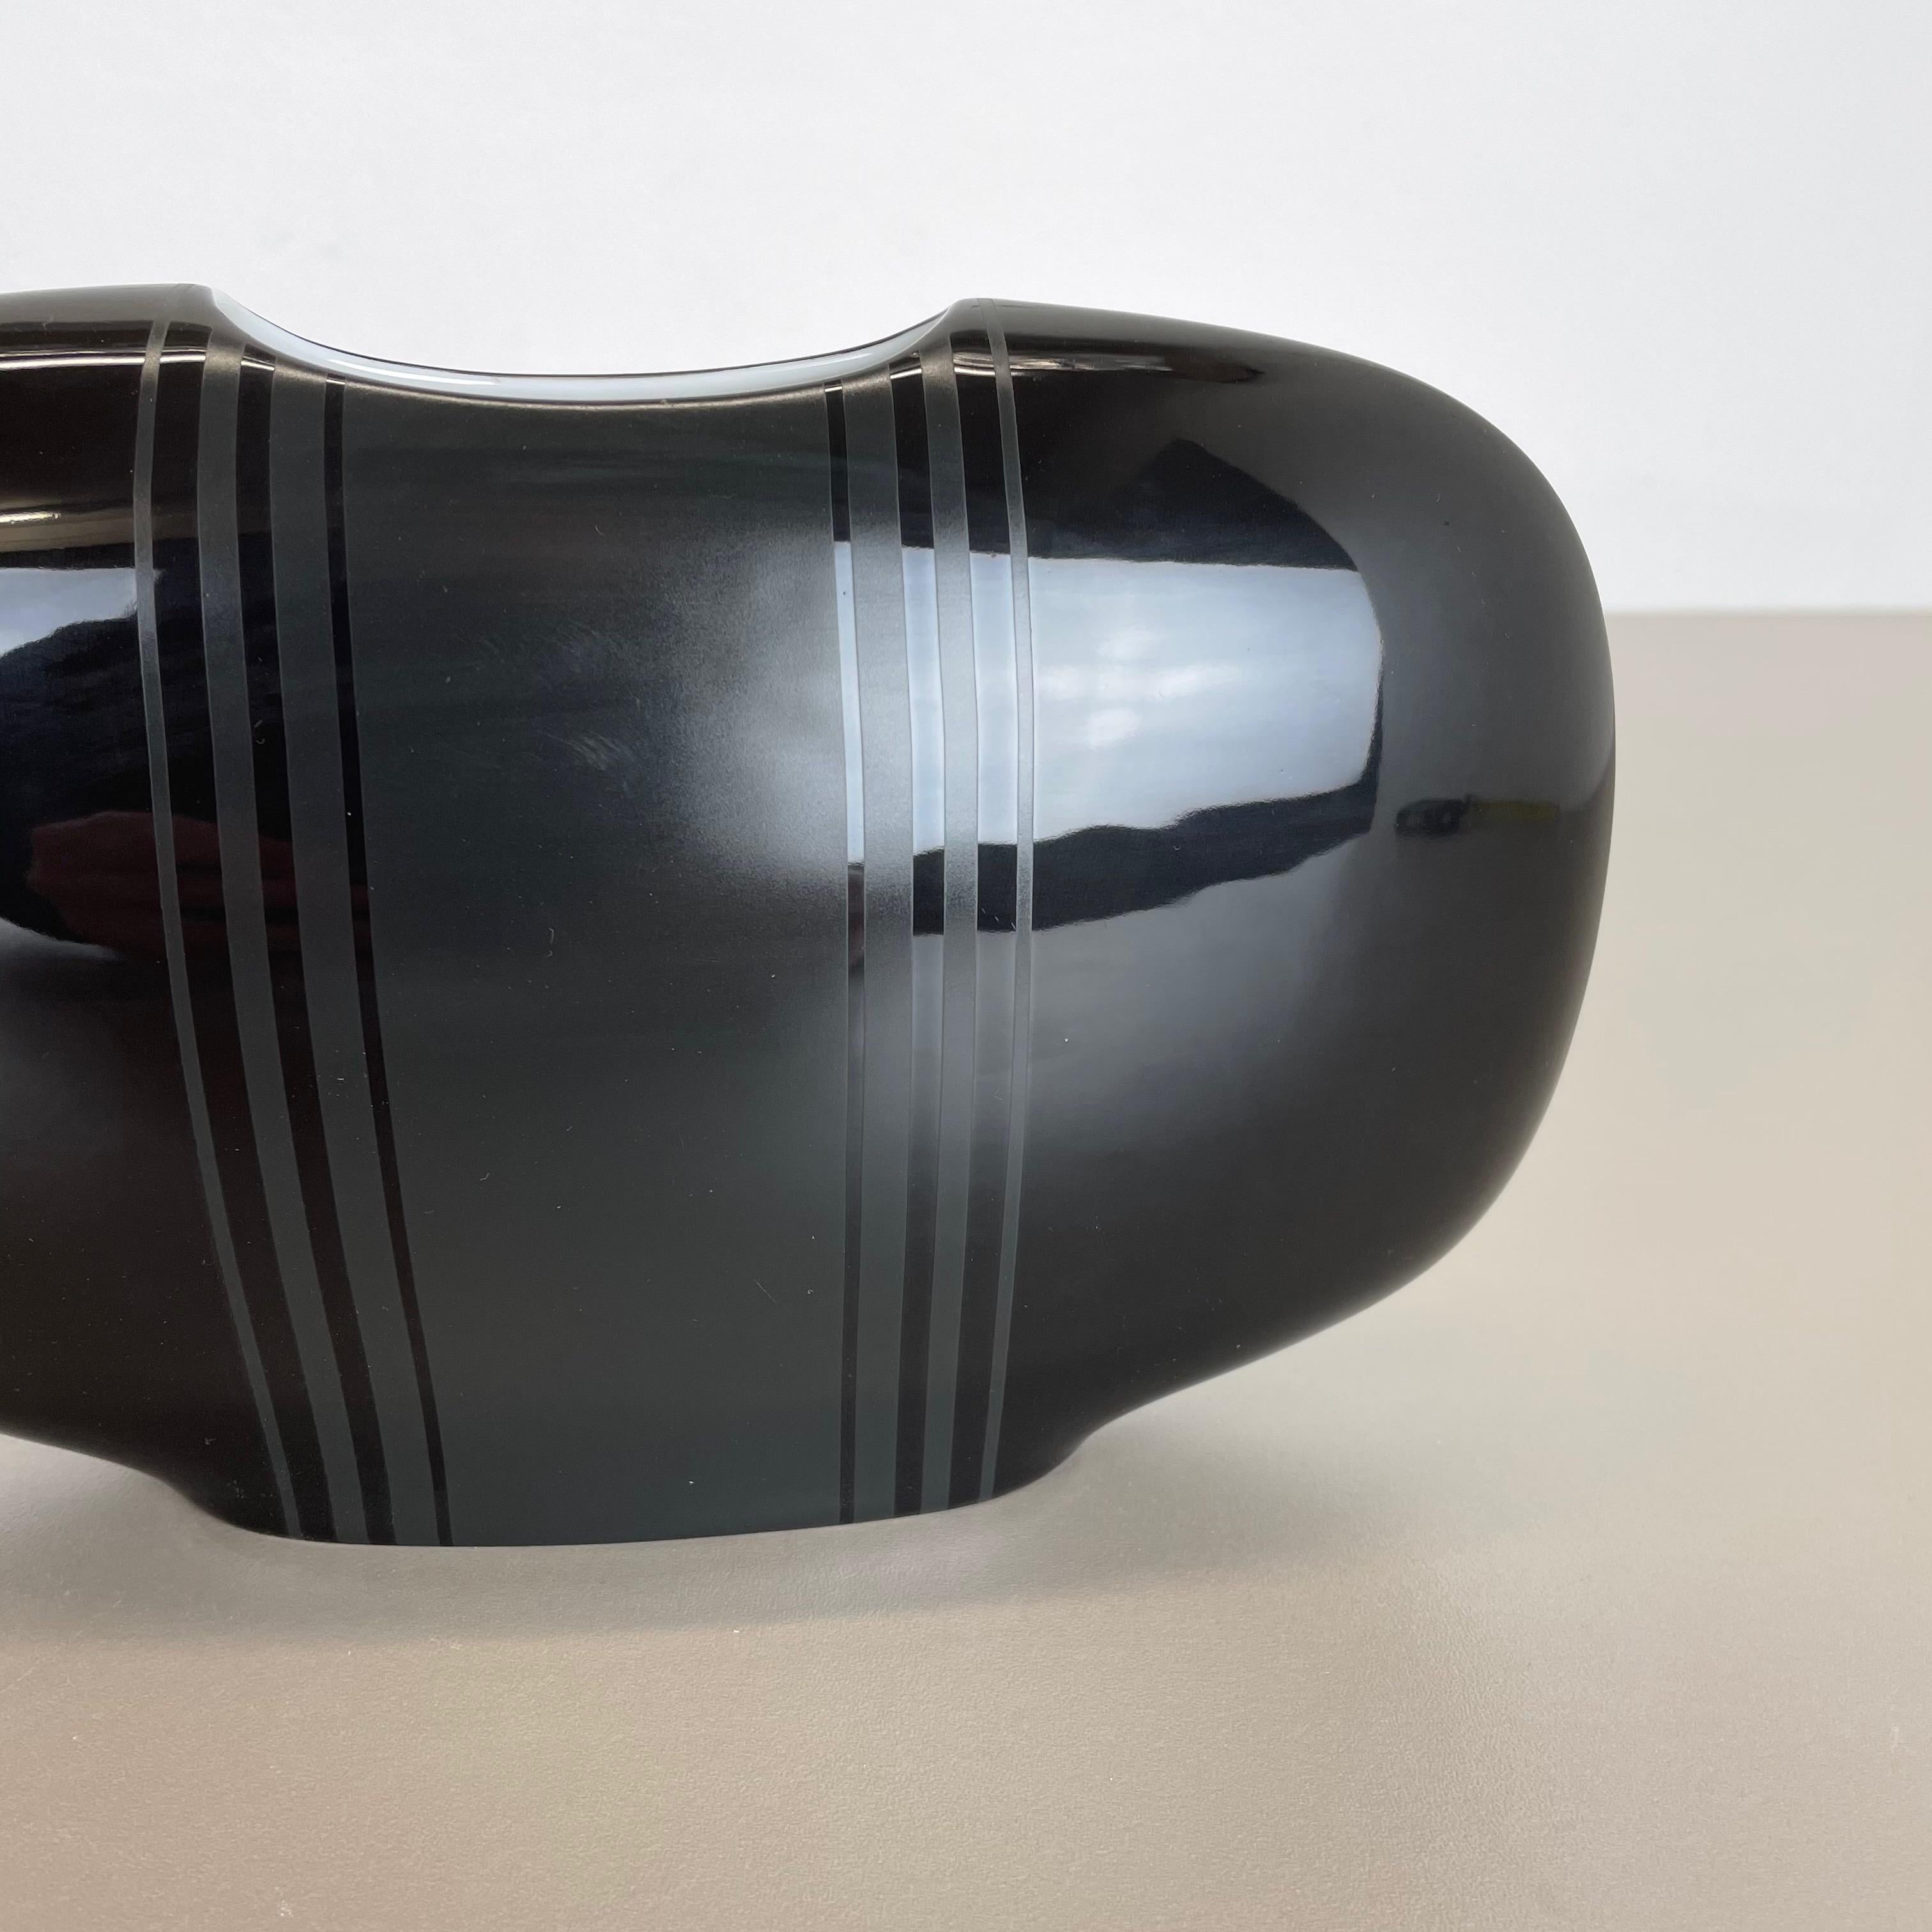 OP Art Vase black Porcelain by K. Dombrowski for Hutschenreuther, 1970s In Good Condition For Sale In Kirchlengern, DE